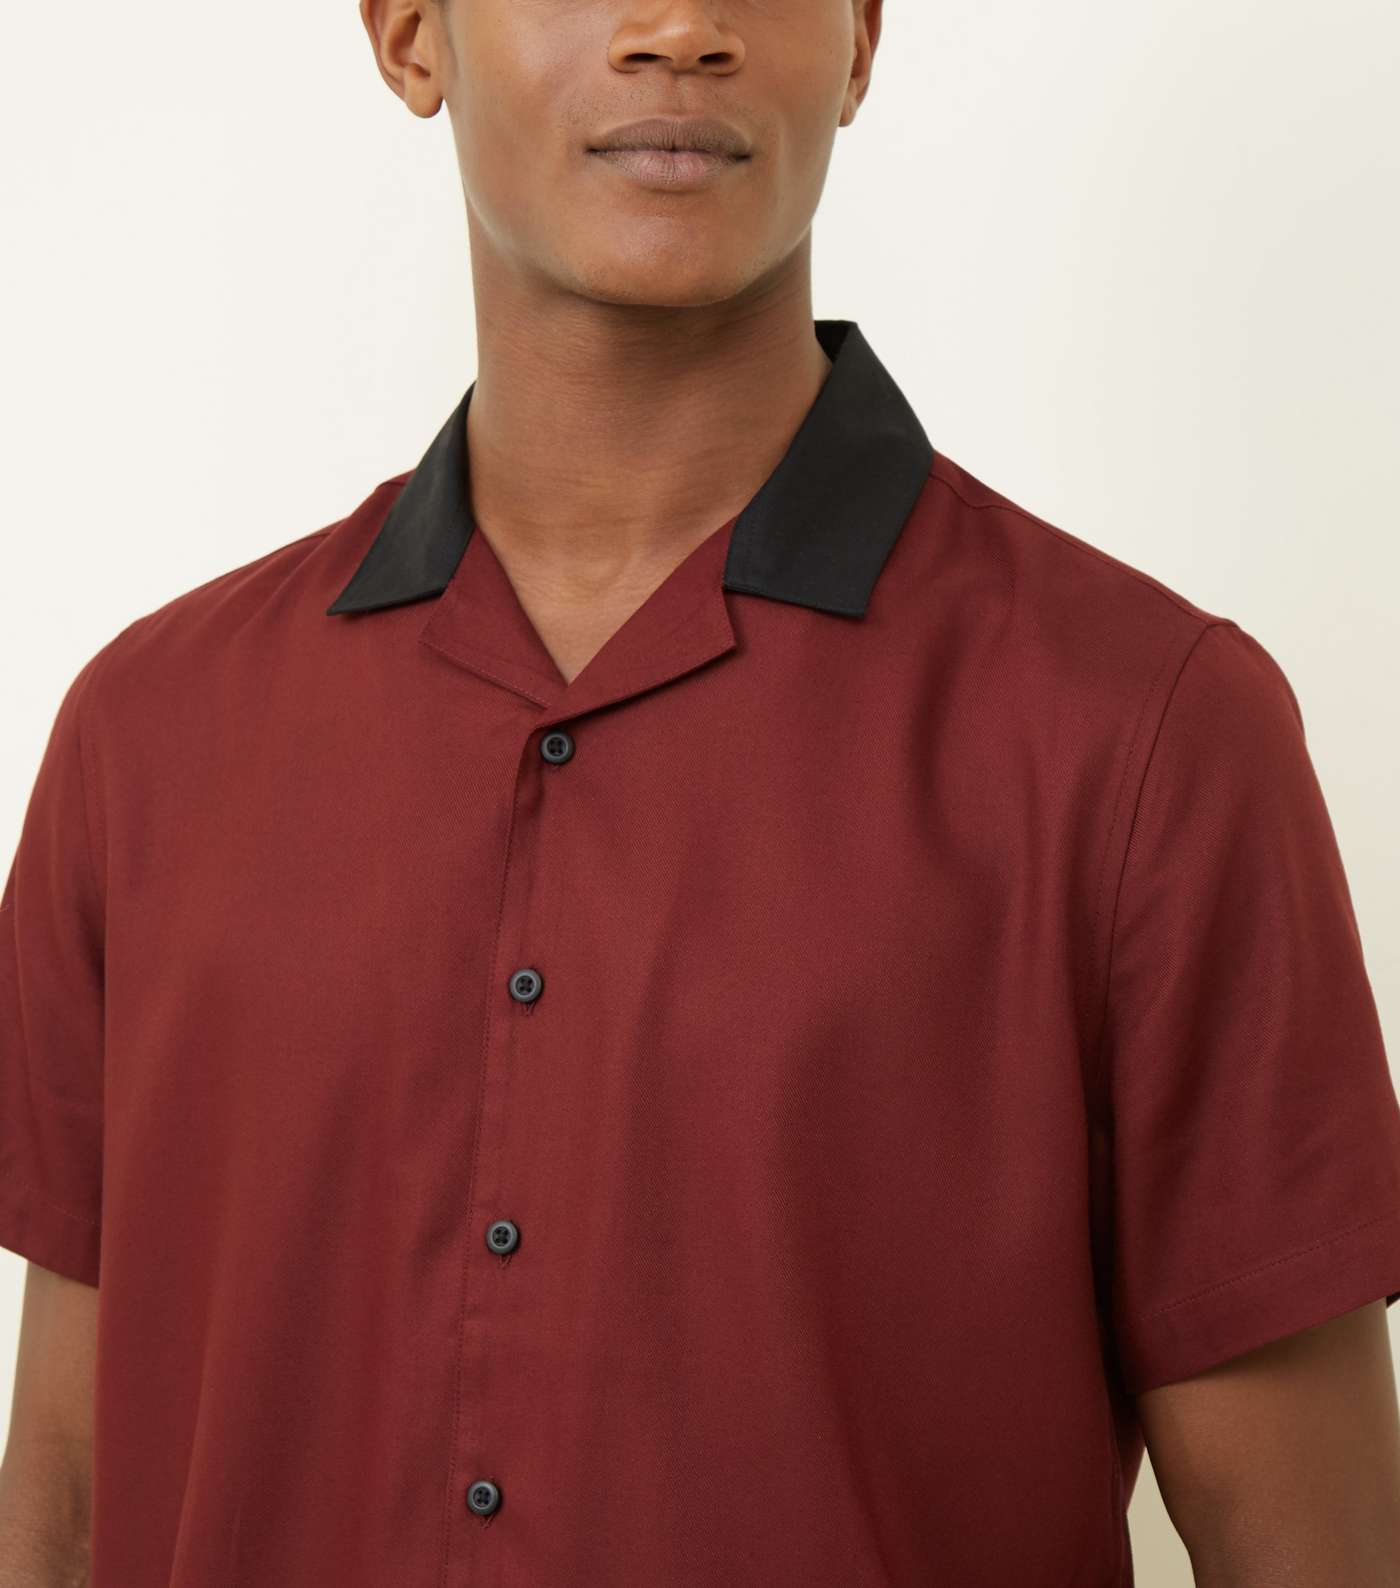 Burgundy Contrast Collared Shirt Image 5